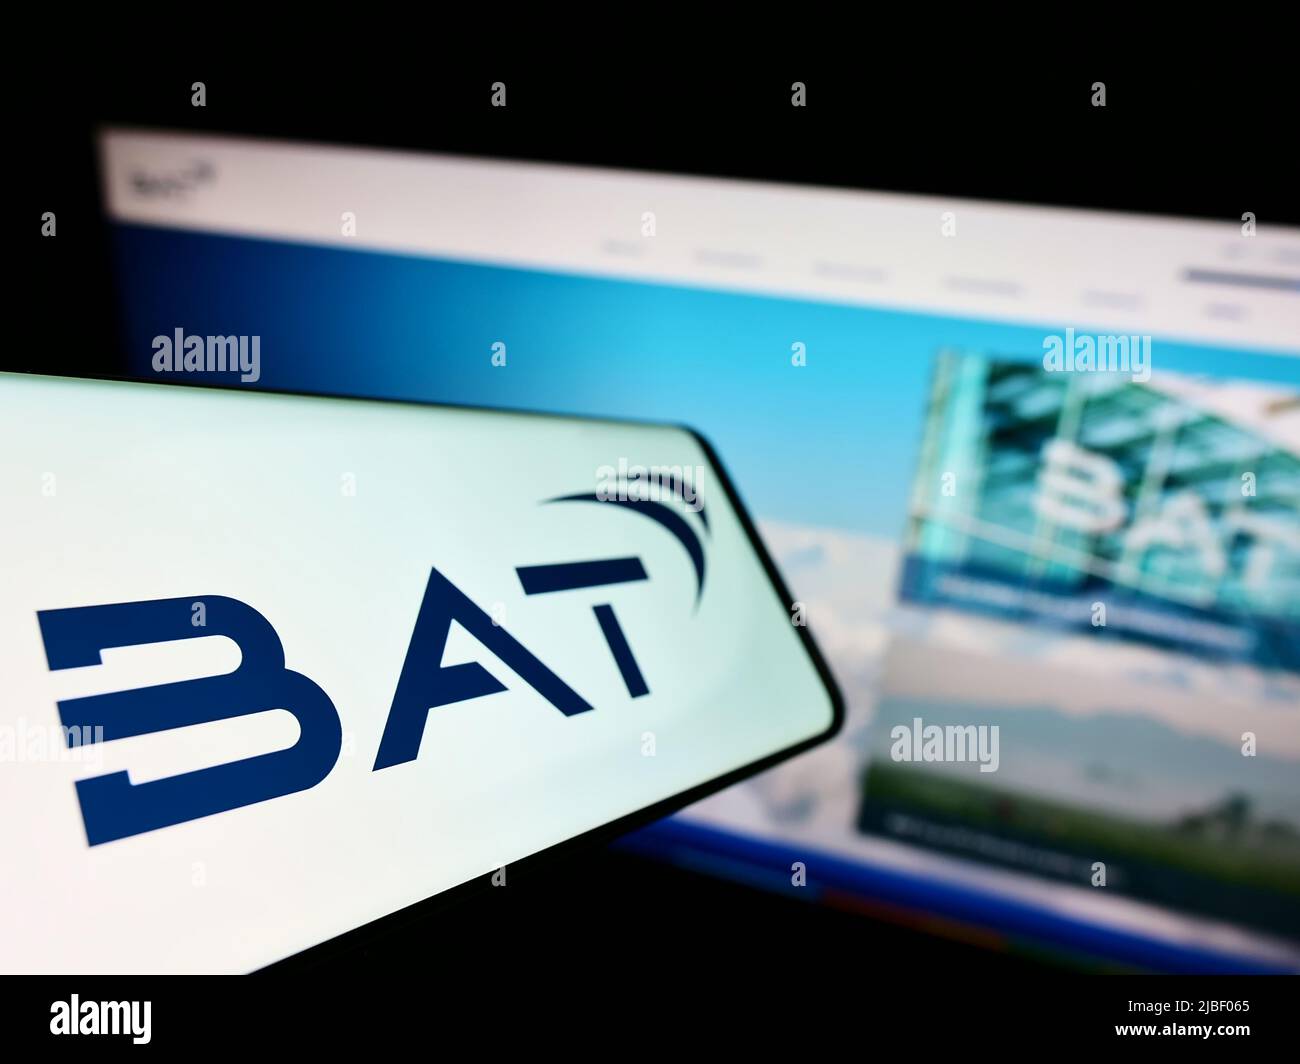 Mobile phone with logo of company British American Tobacco plc (BAT) on screen in front of website. Focus on center-left of phone display. Stock Photo